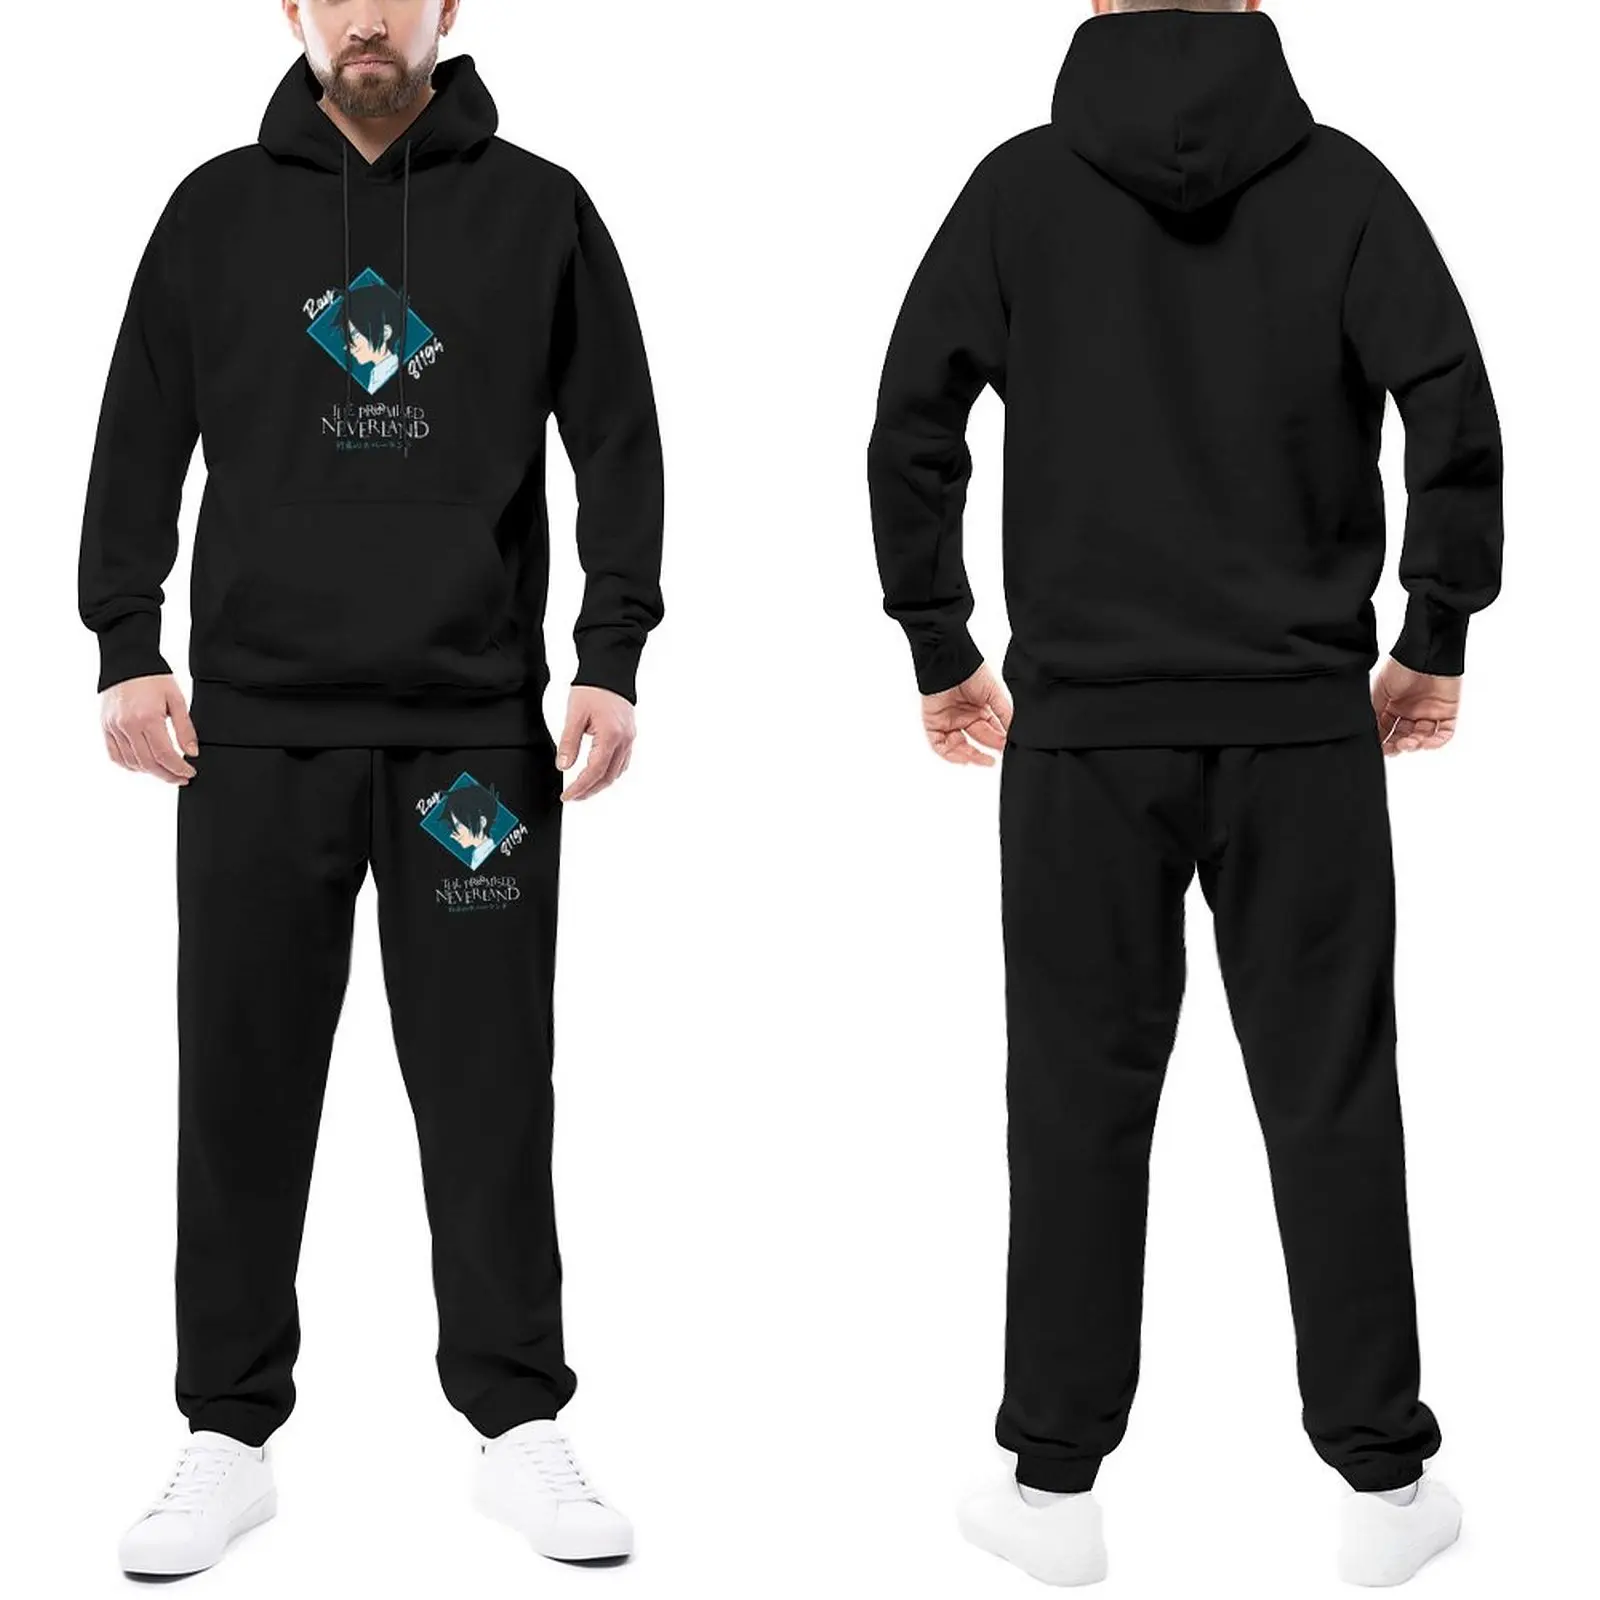 

THE PROMISED NEVERLAND RAY Tracksuits Men Manga Funny Anime Hoody Sweatpant Set Print Hooded Suits Day Street Style Jogger Sets